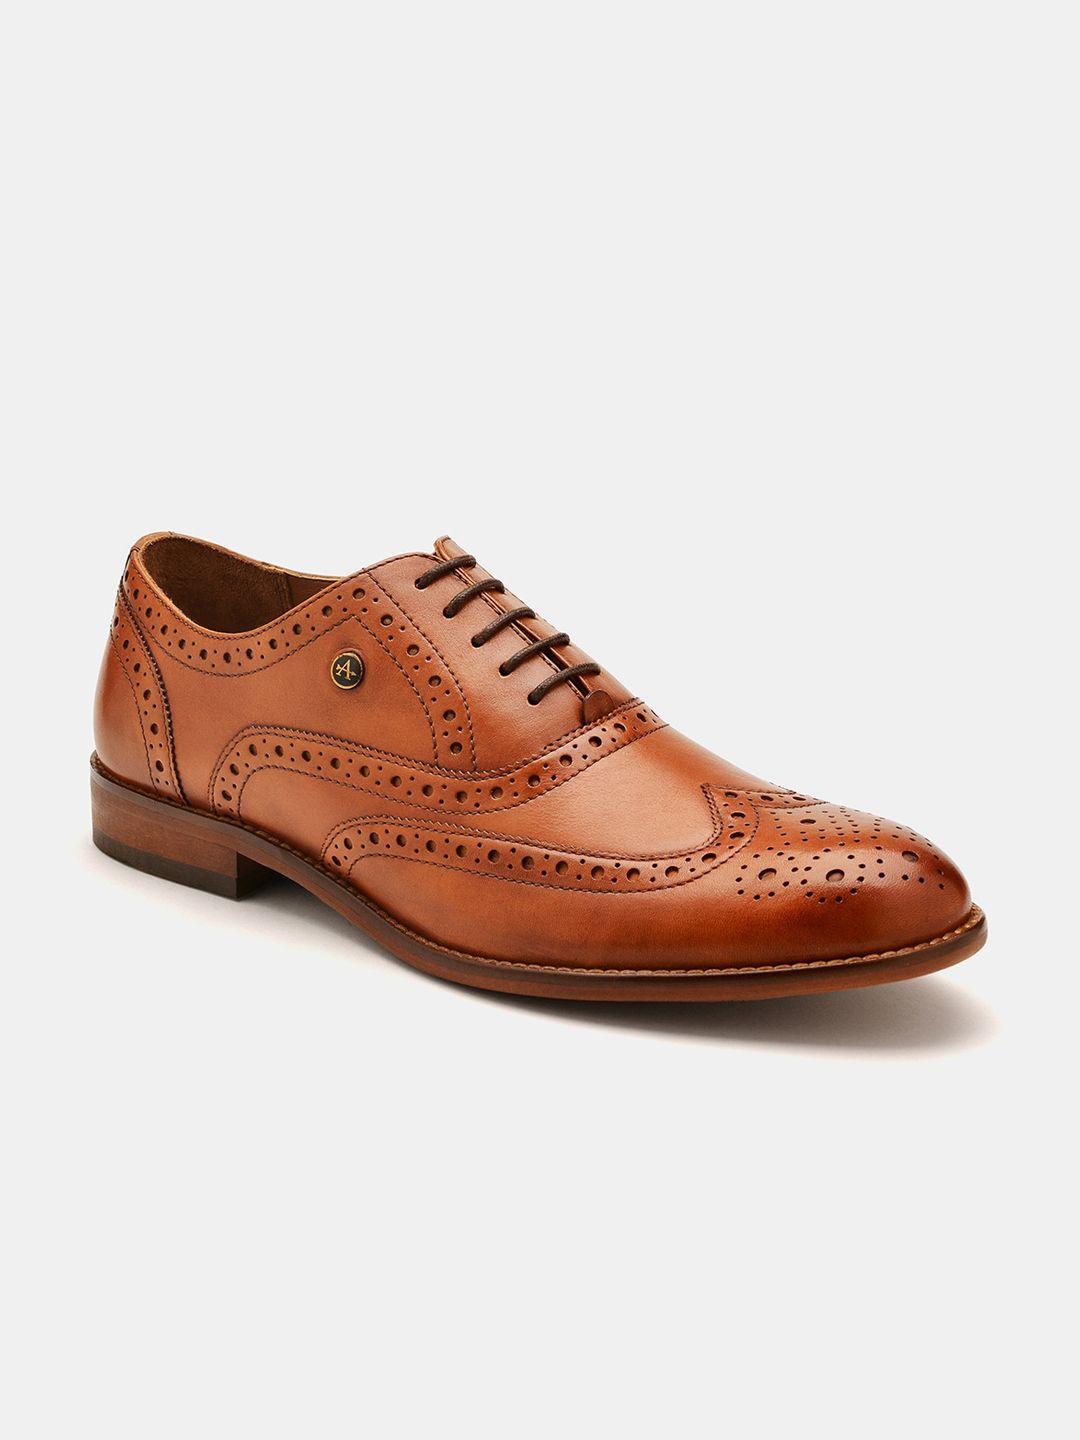 Arrow Men CHARTER Textured Leather Formal Brogues